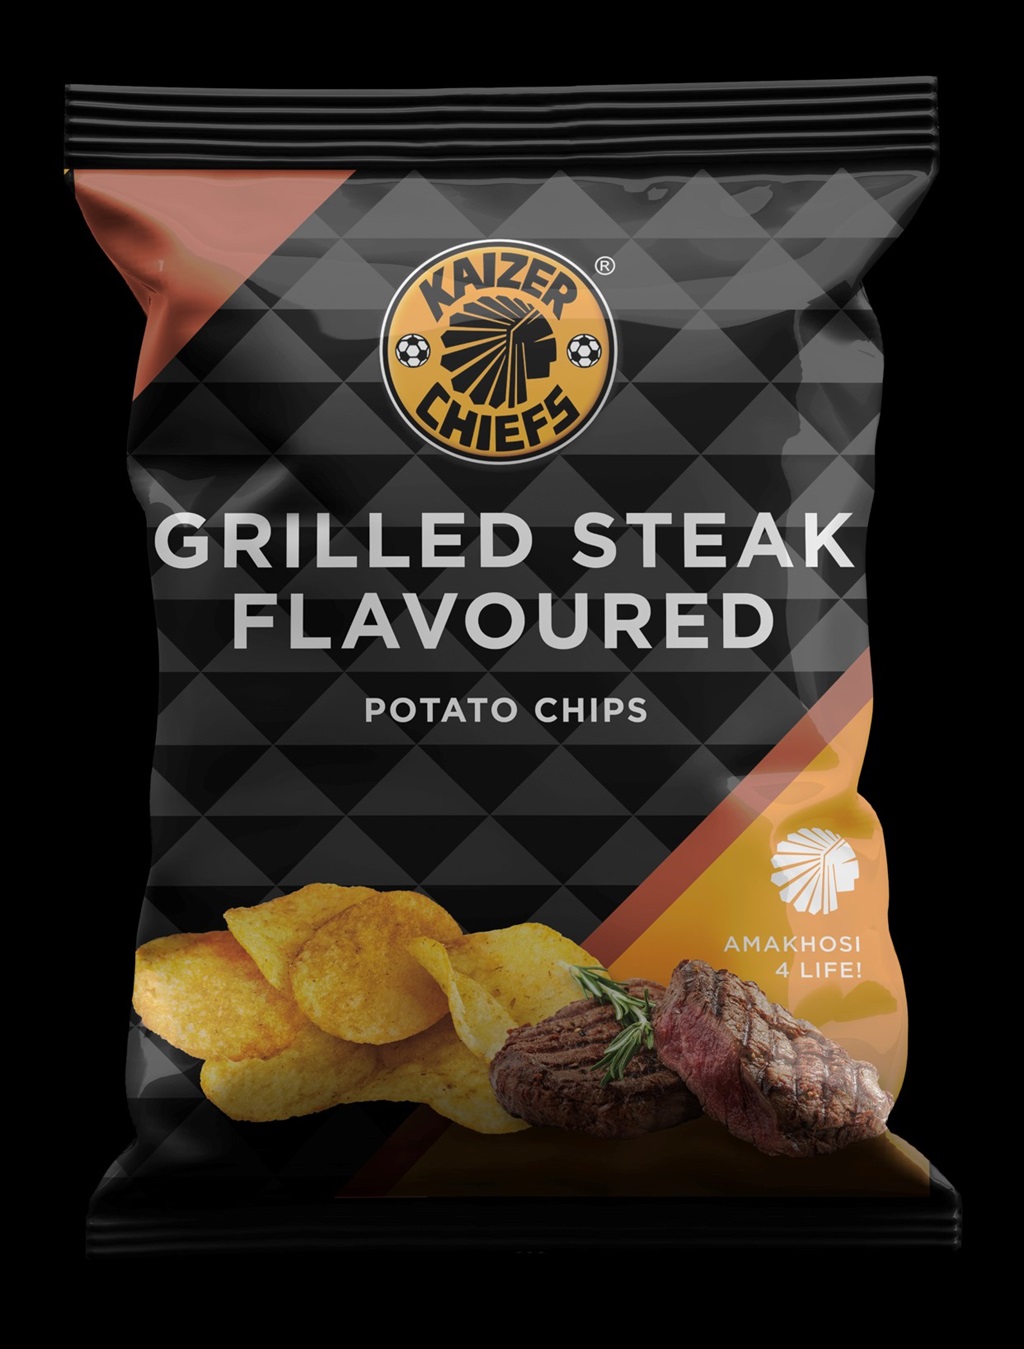 Kaizer Chiefs has revealed a new range of chips, w